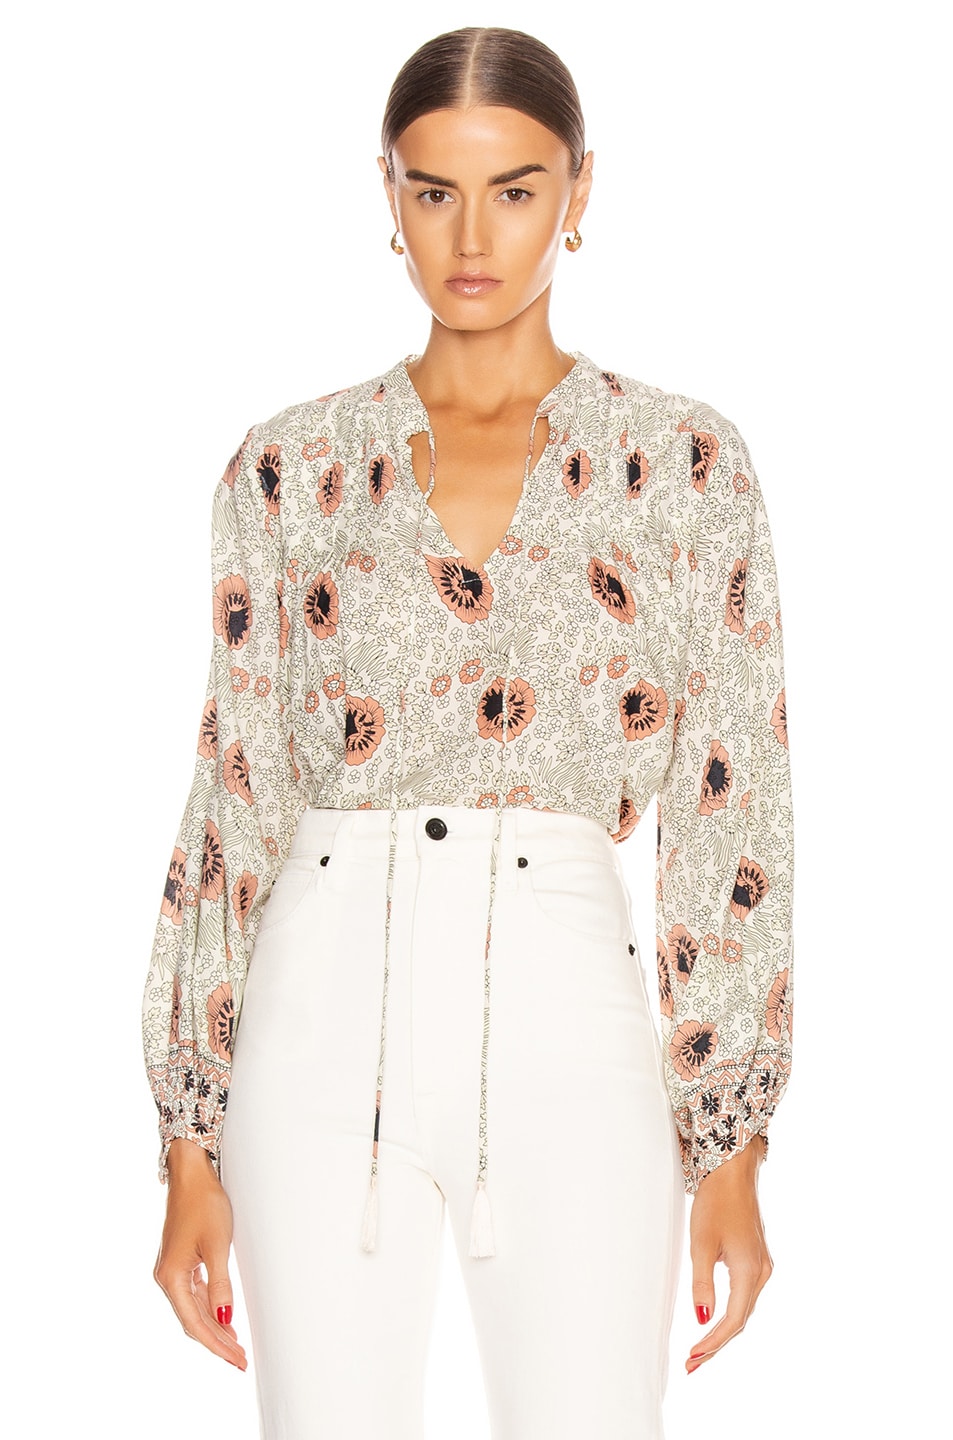 Natalie Martin Lizzy Shirt in Vintage Flowers Apricot | FWRD